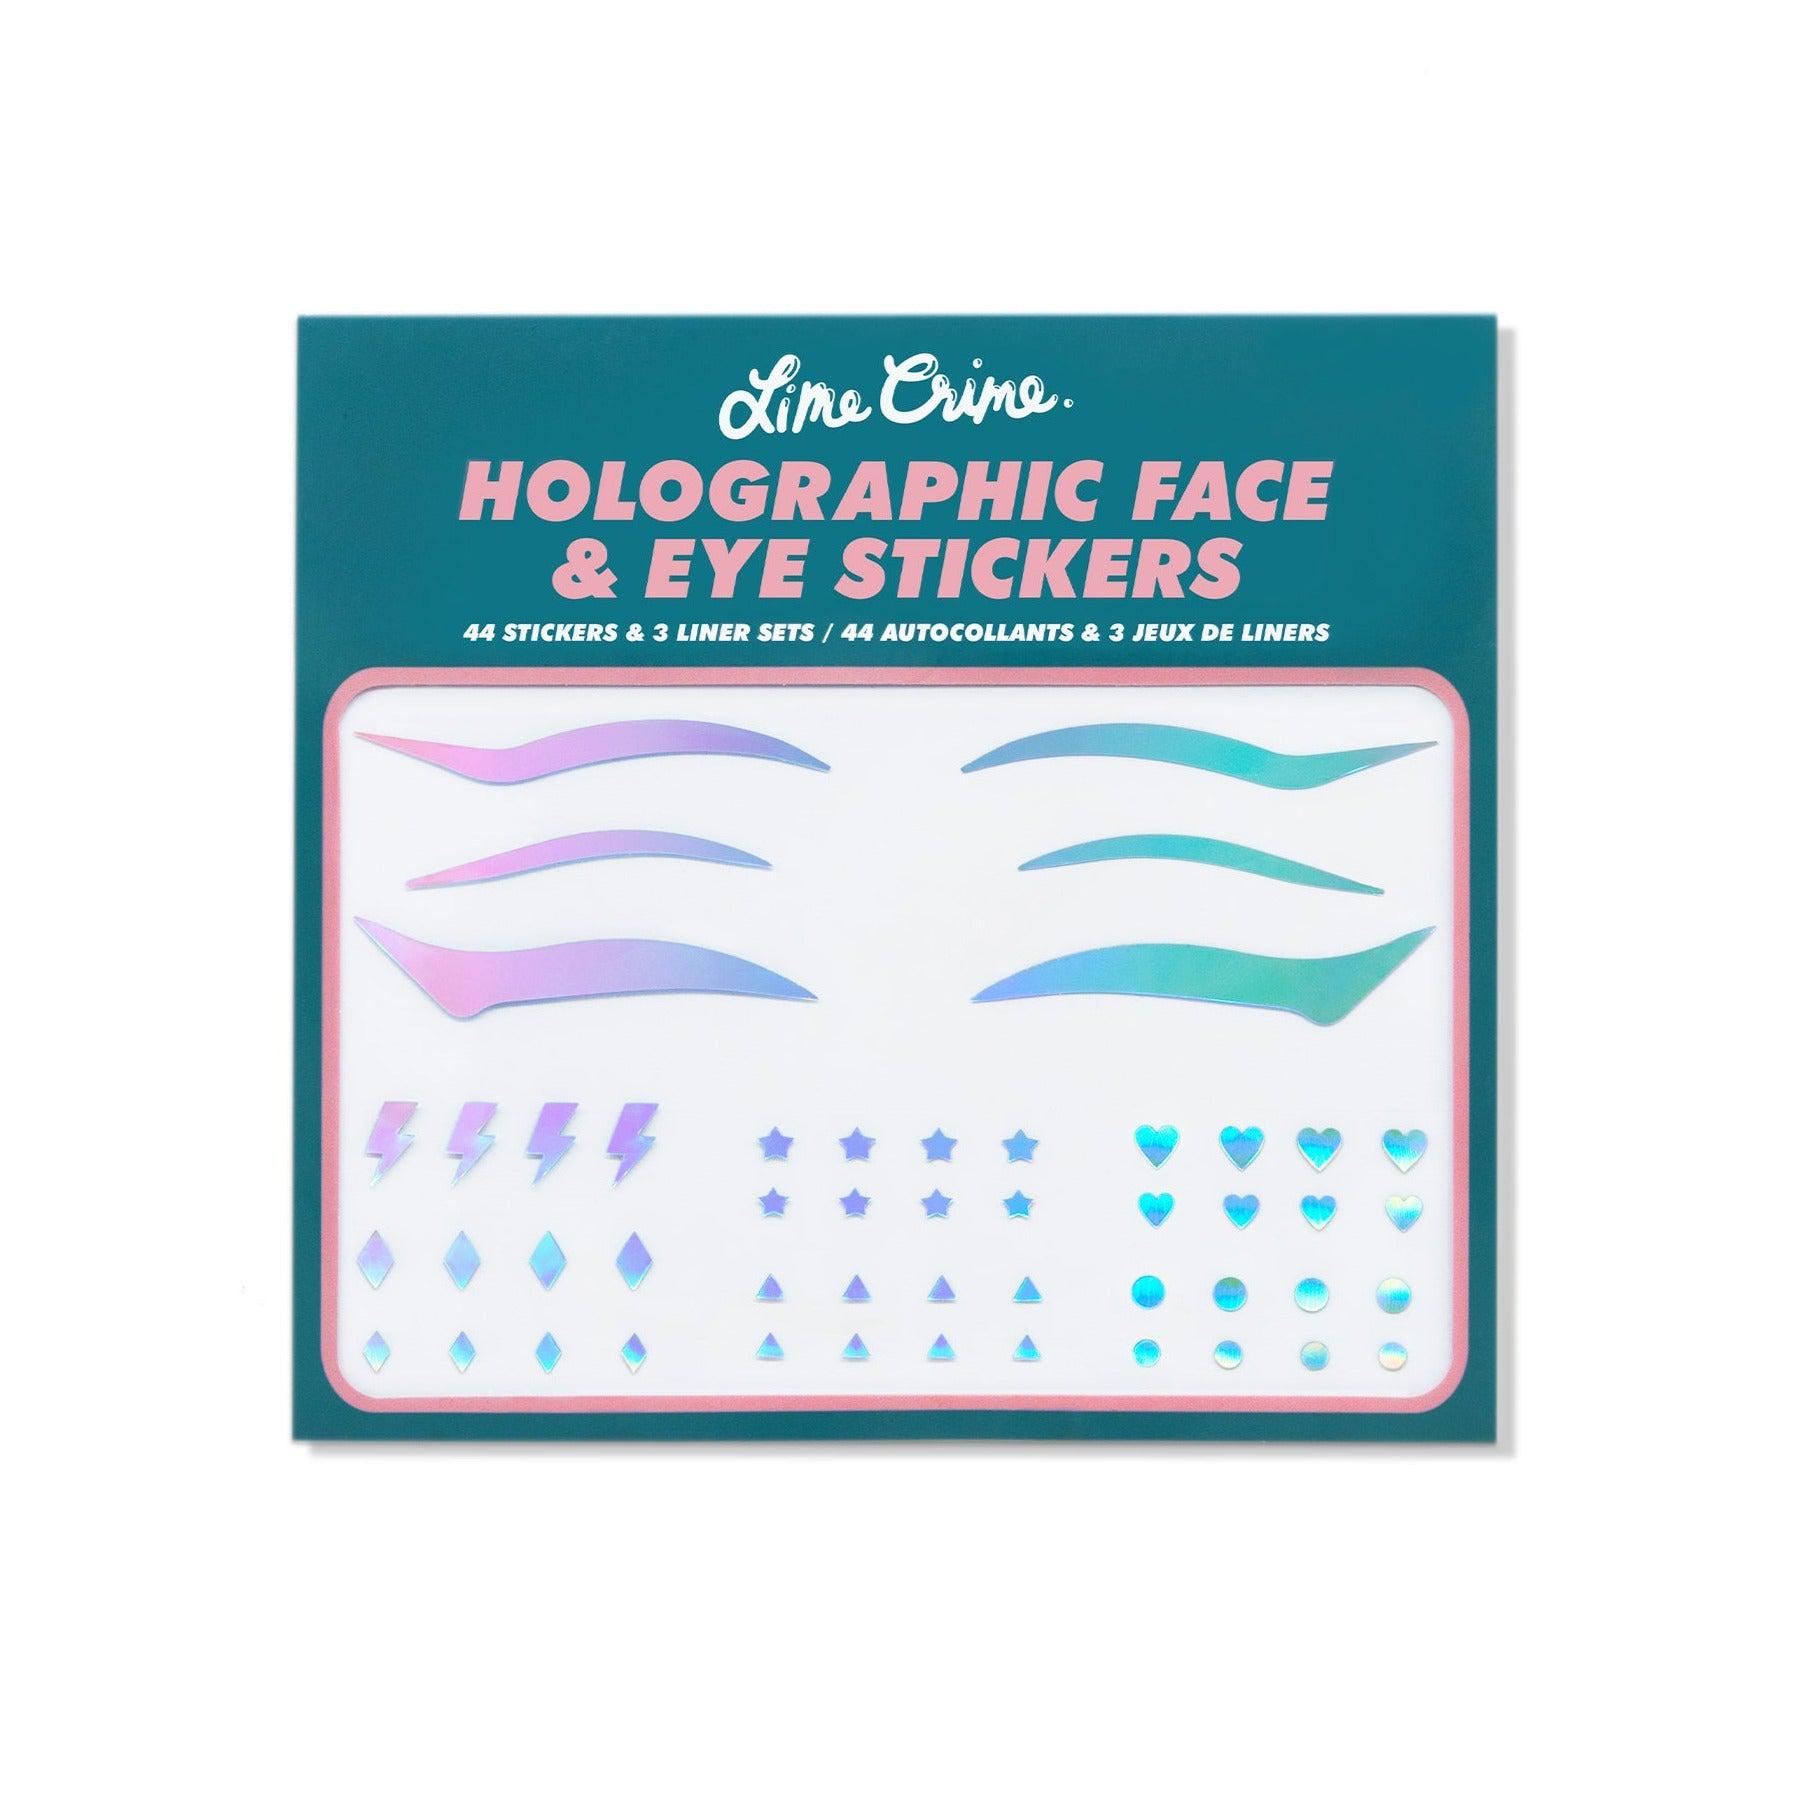 Holographic Face & Eye Stickers